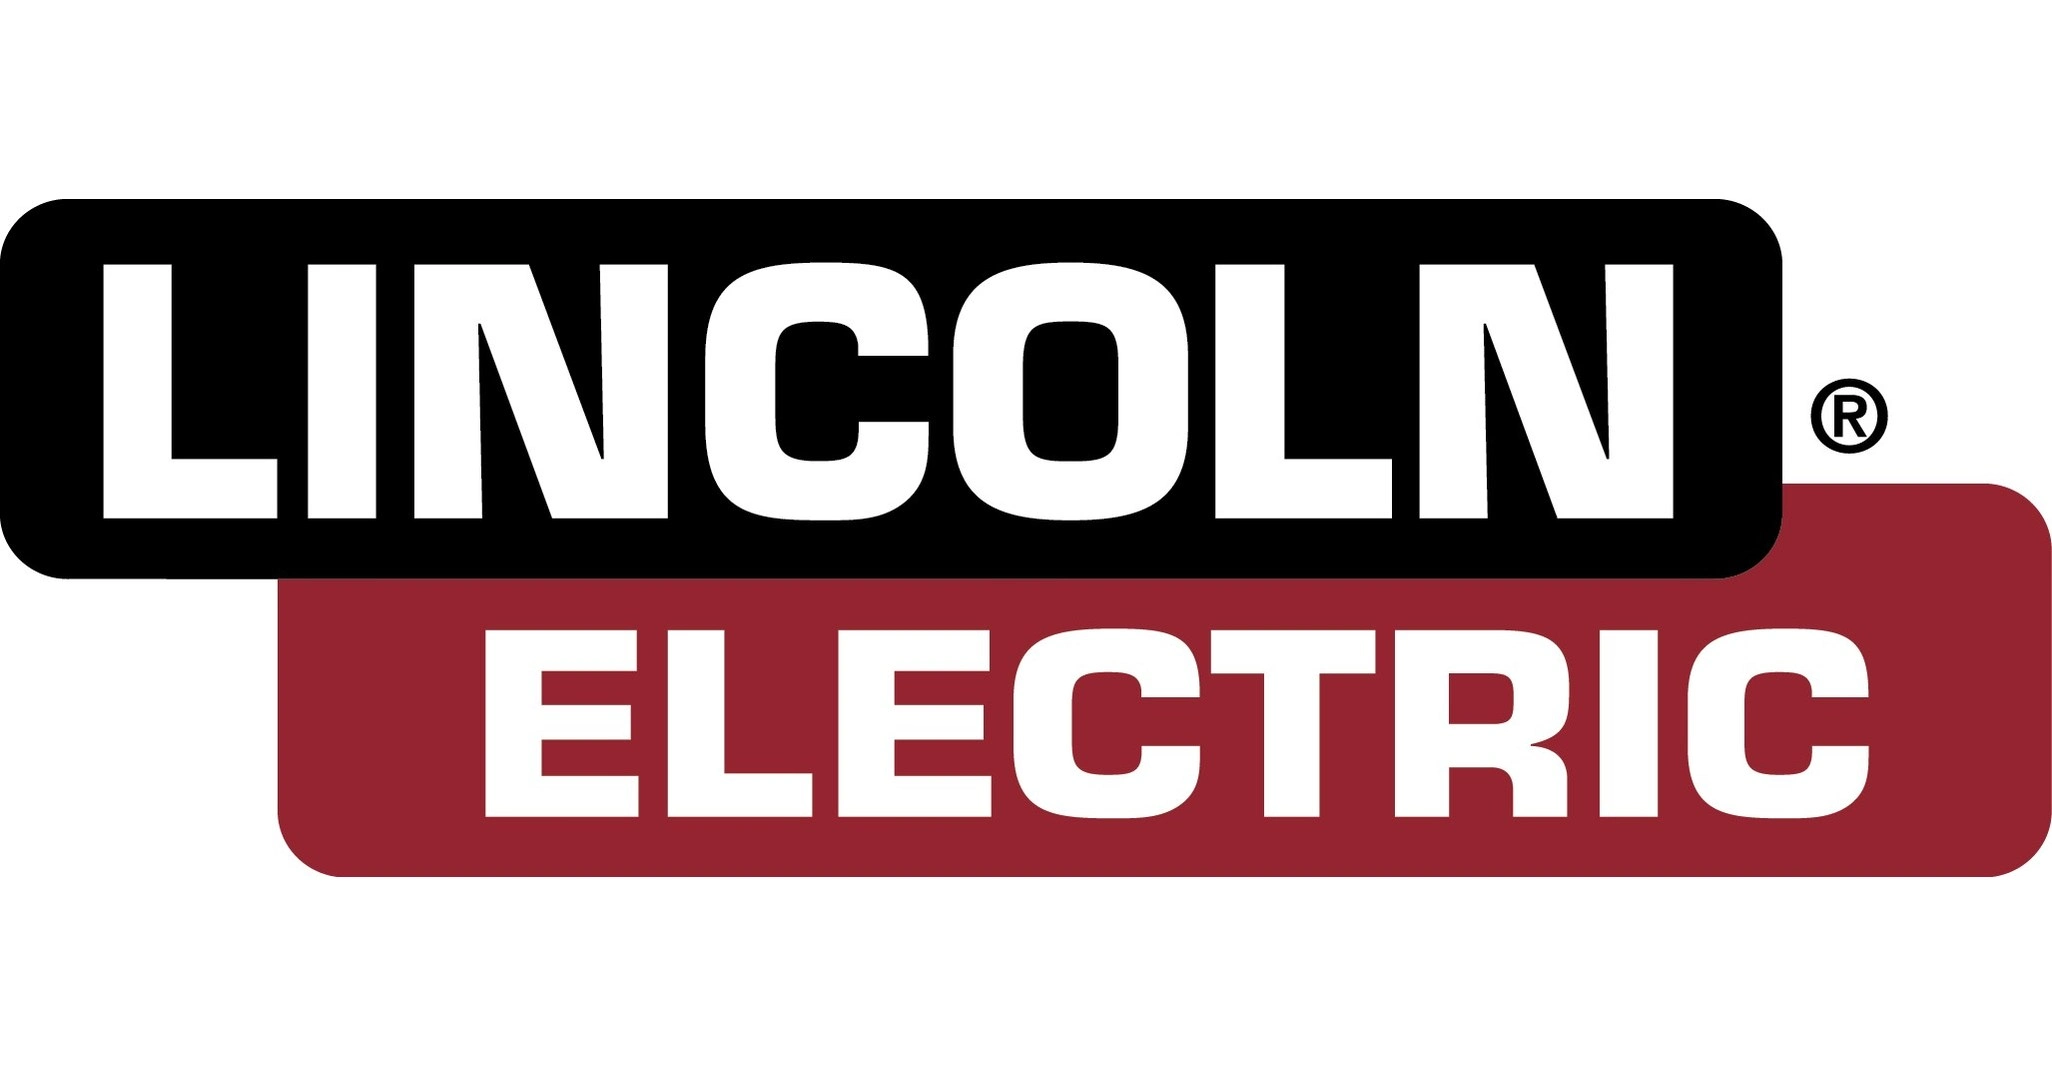 Image of a Lincoln Electric Logo